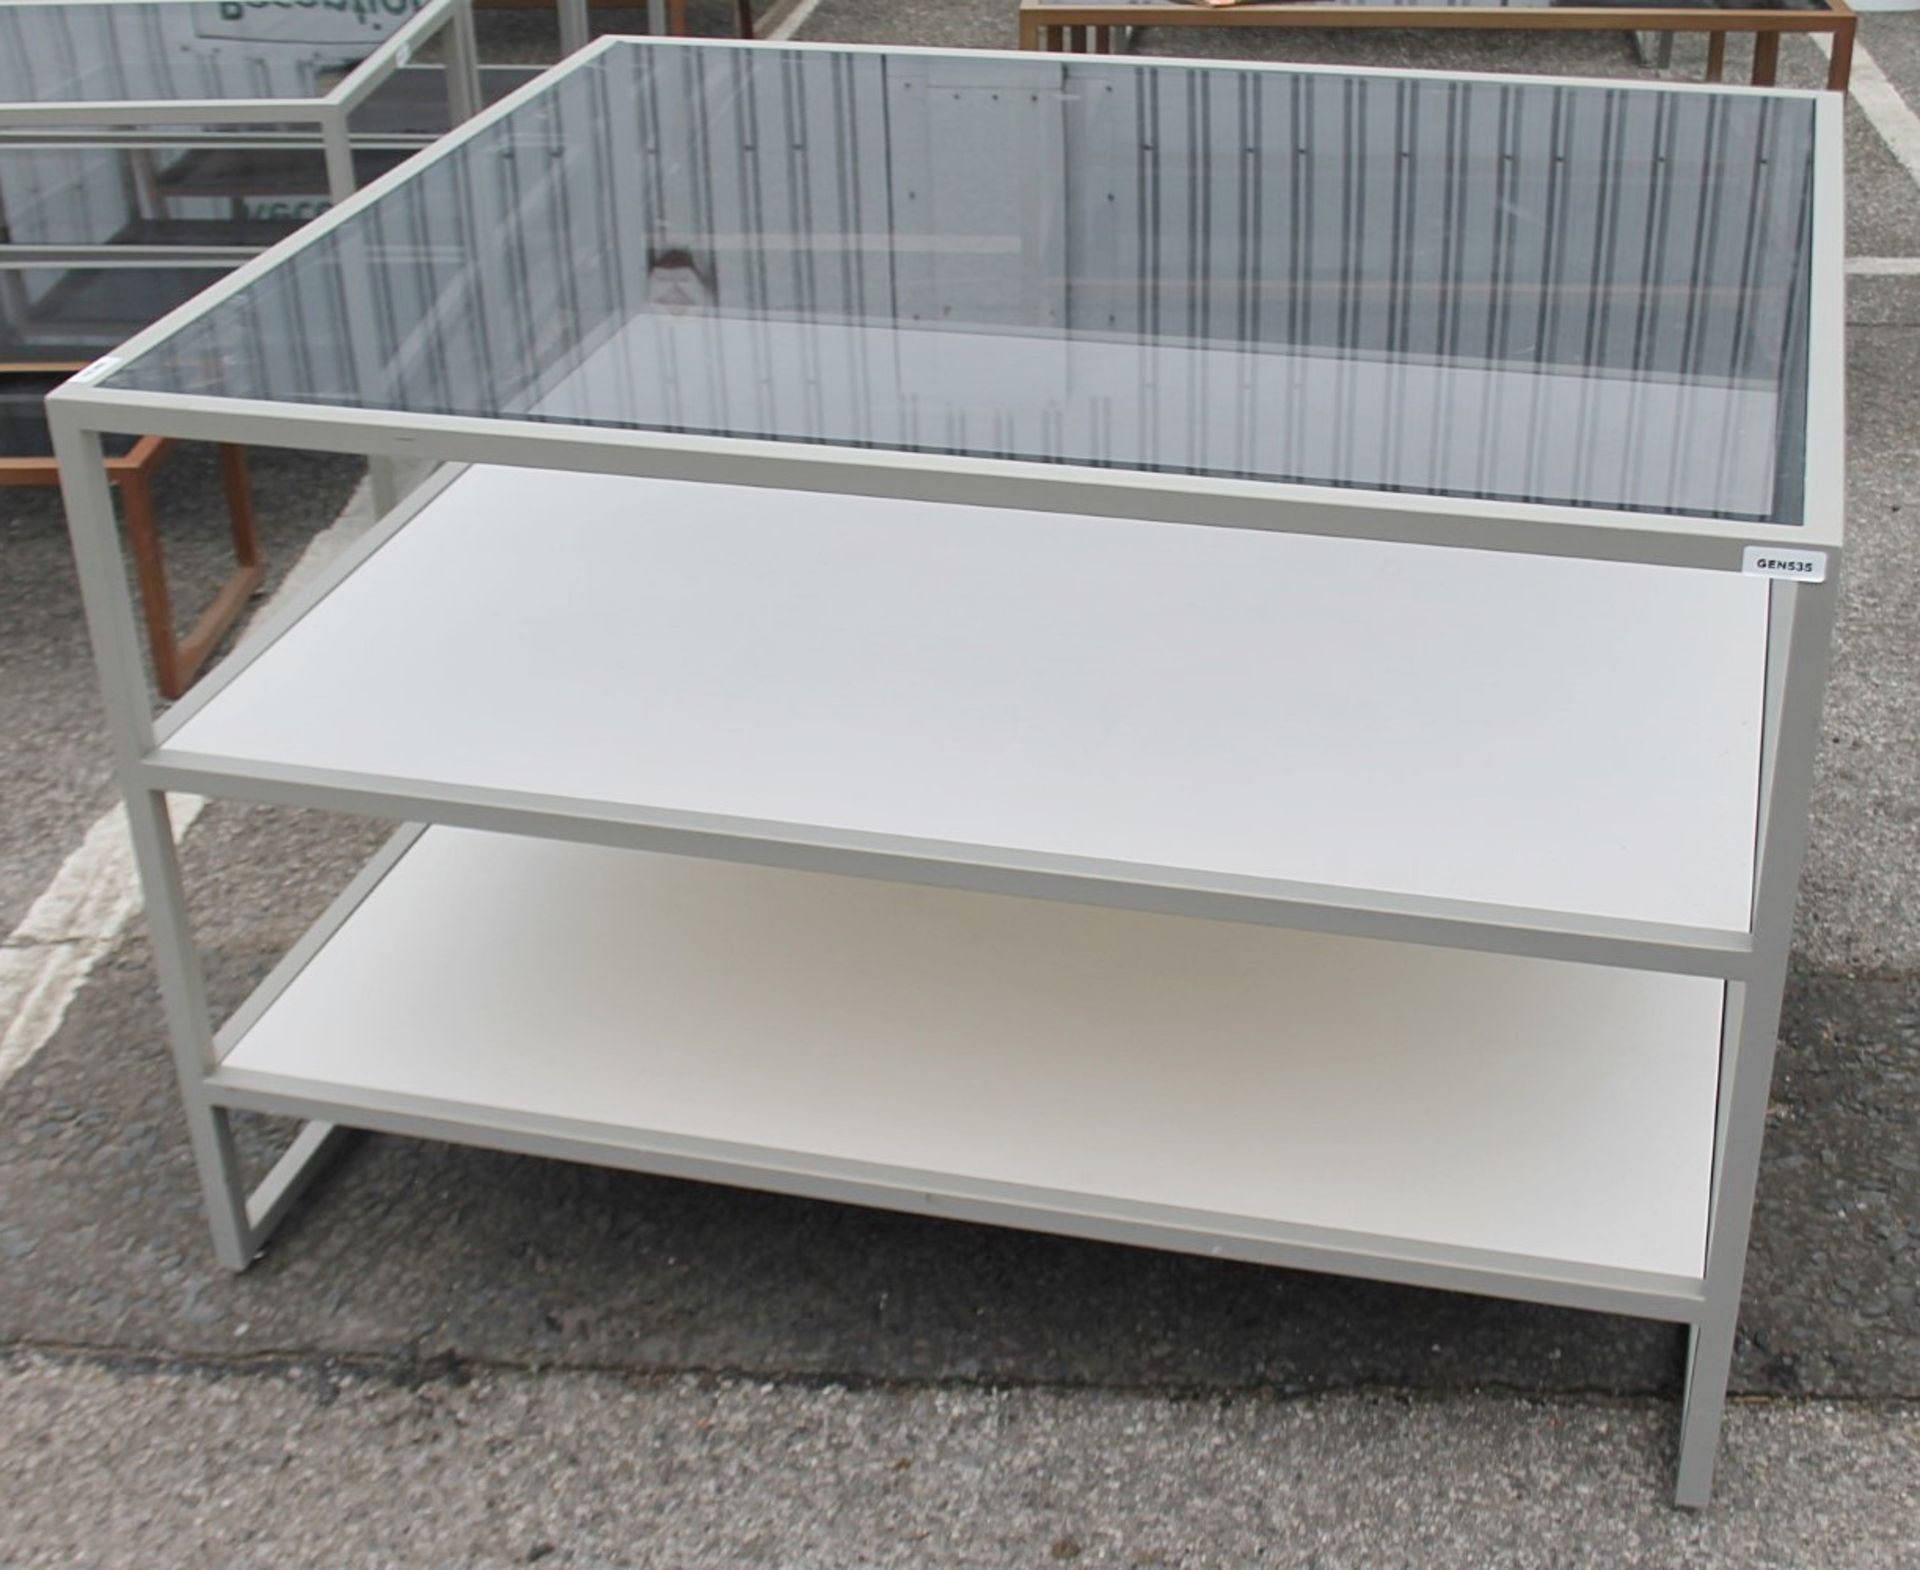 1 x Large Square Commercial 3-Tier Shop Retail Display Unit With Tinted Glass Top, In Grey - Image 3 of 3